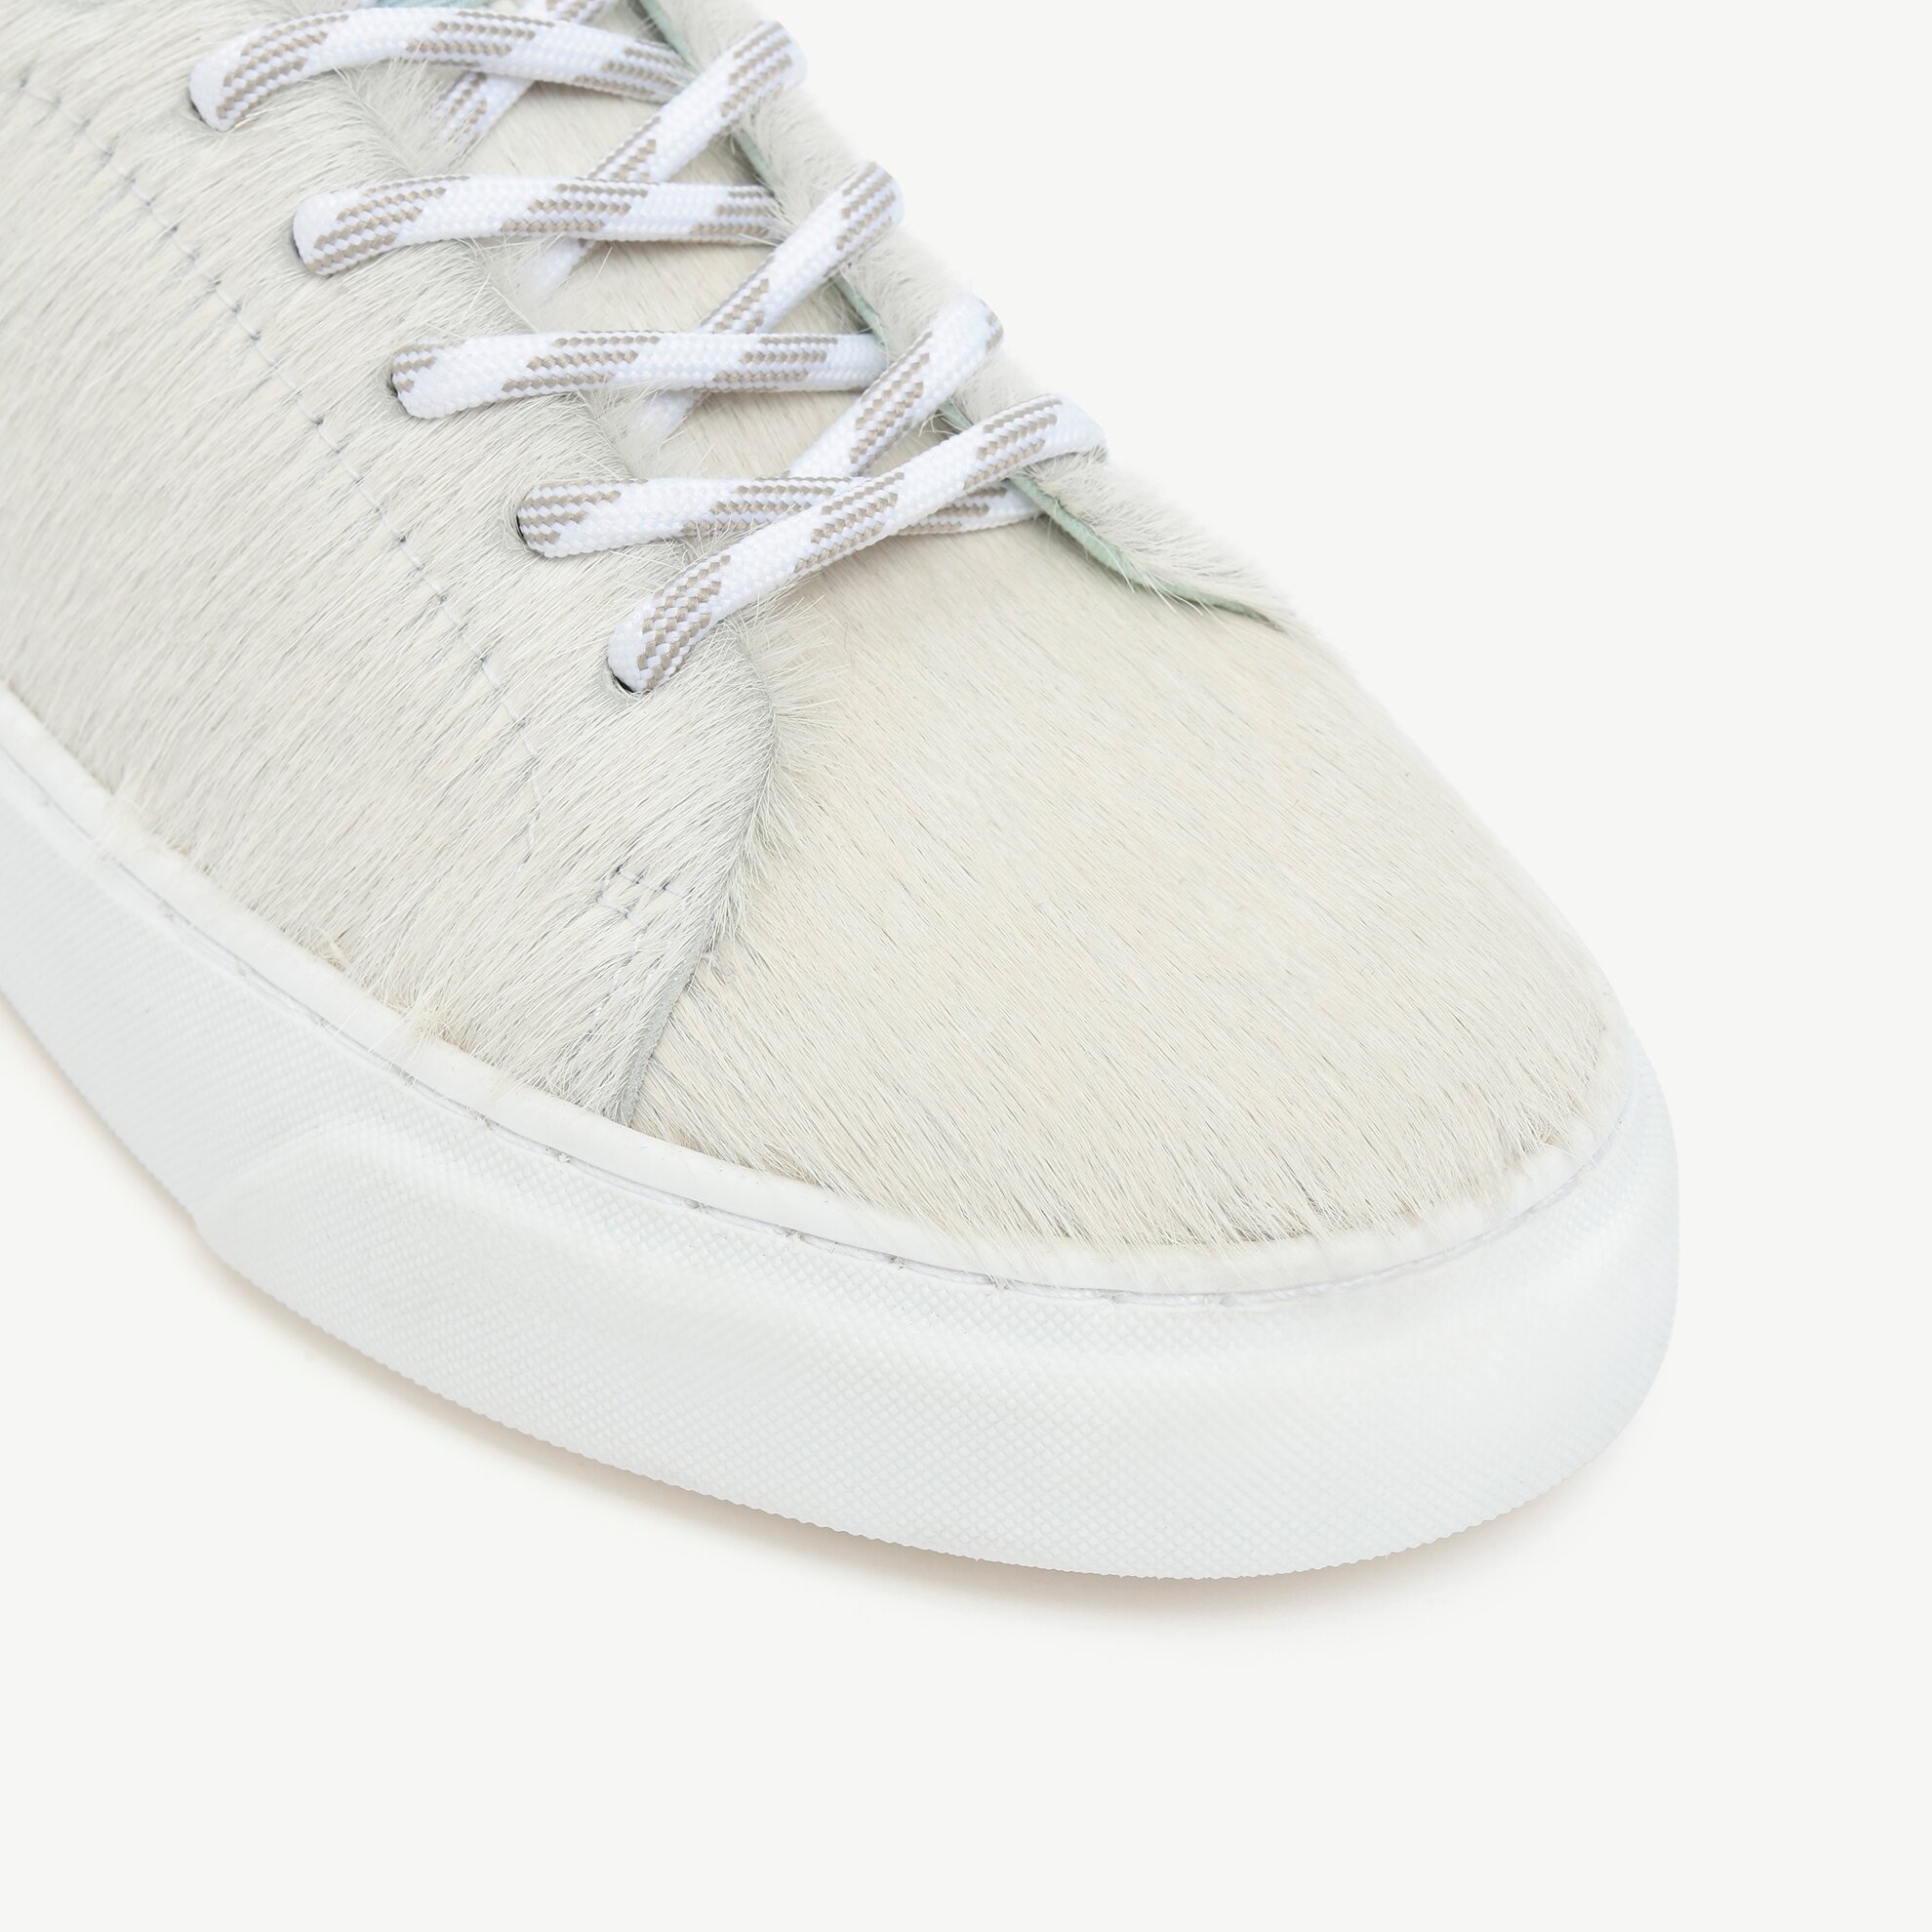 Pony Leather Sneaker With Contrast Lining